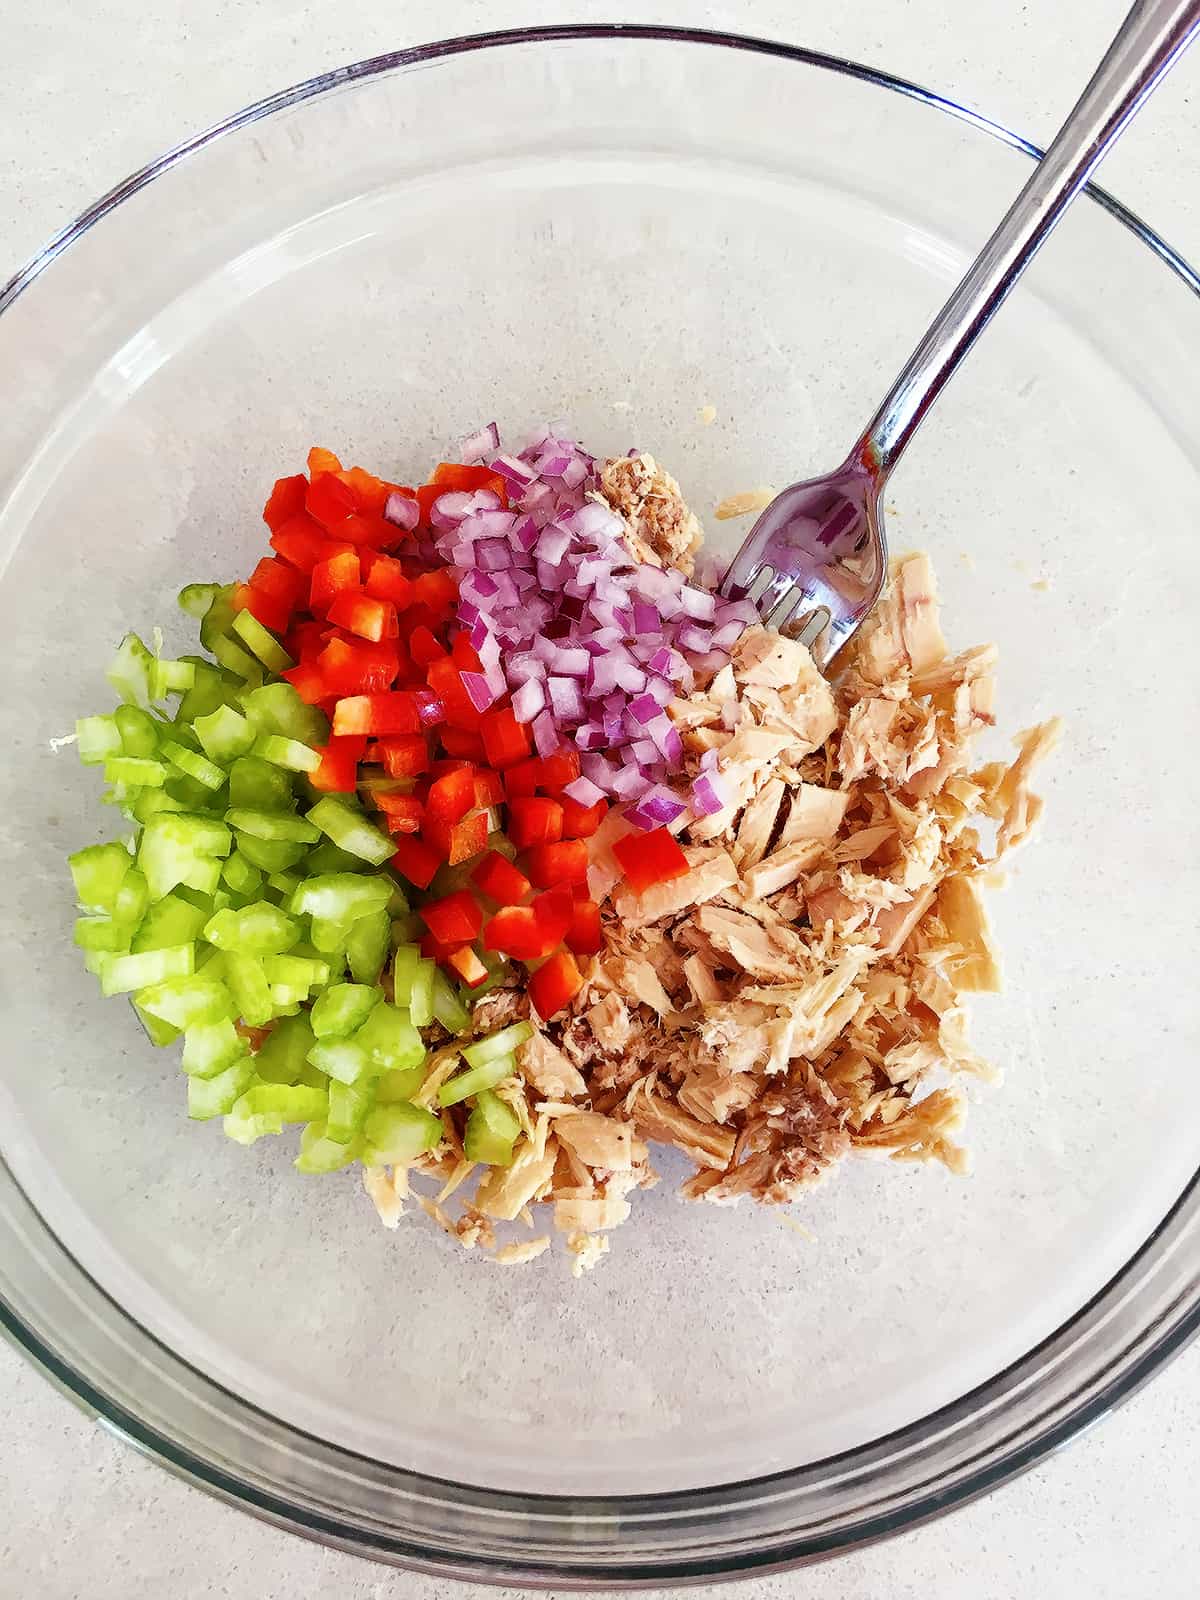 Freshly chopped vegetables and tuna in a glass mixing bowl